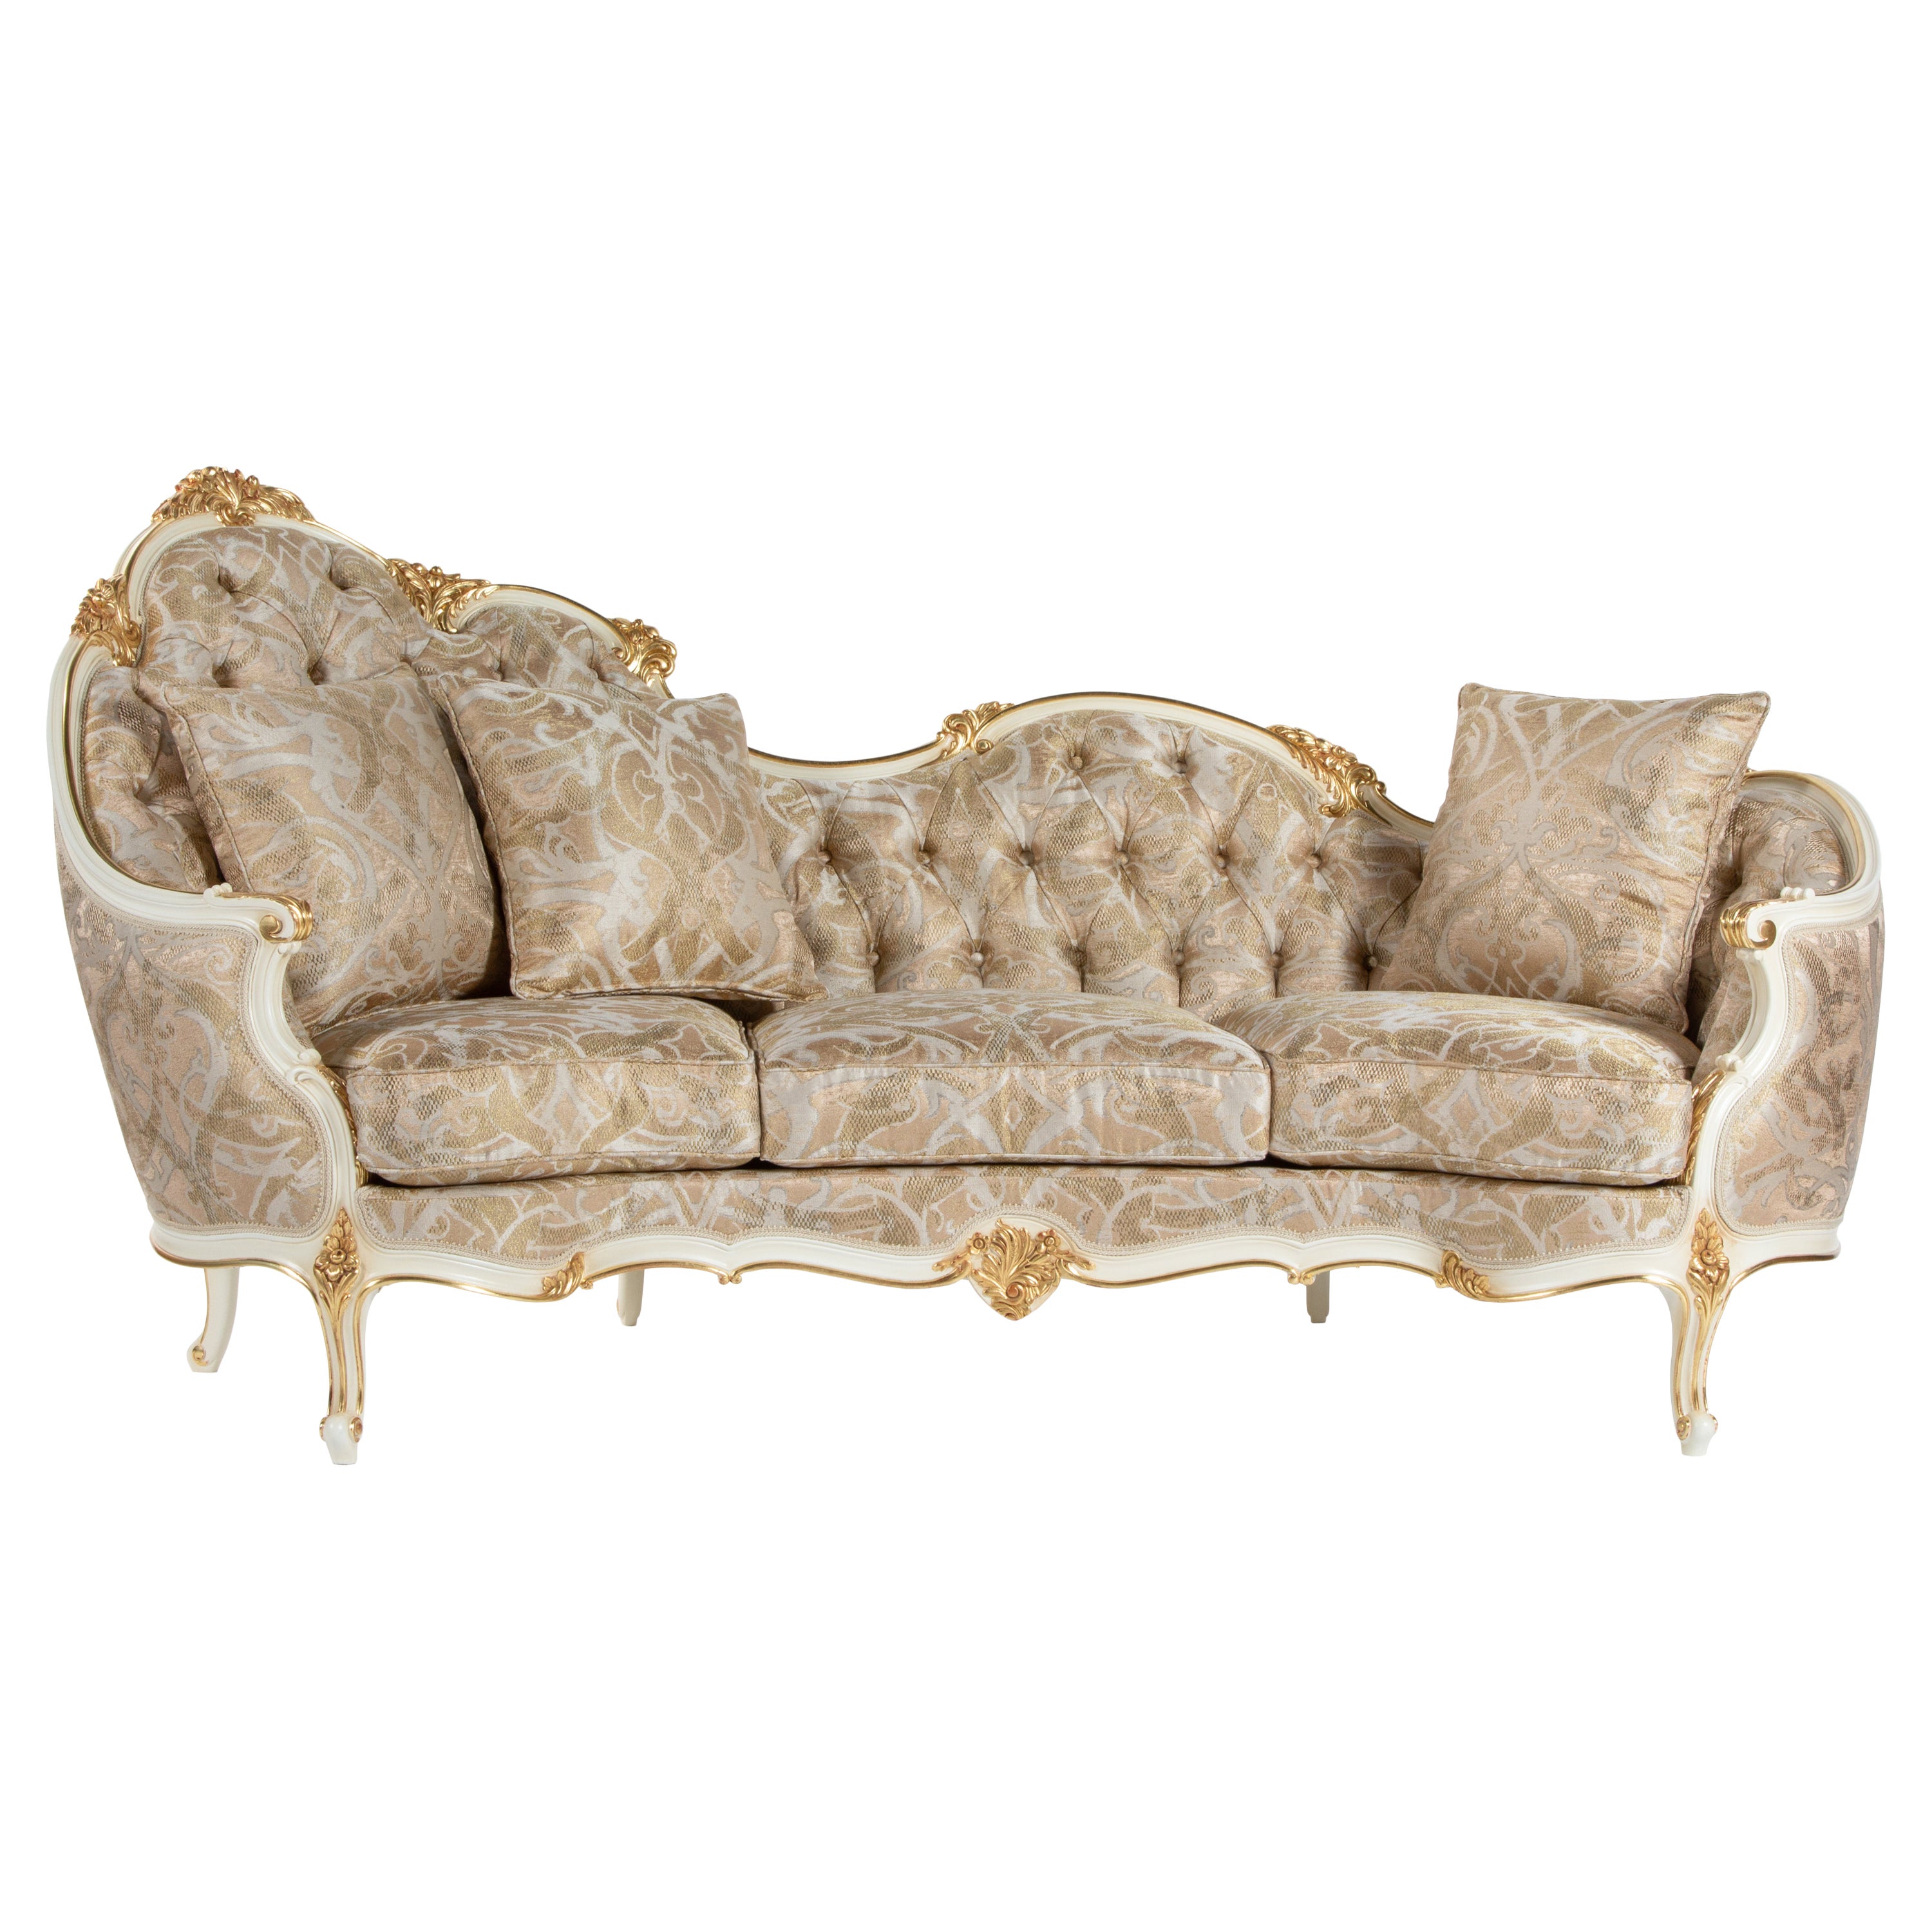 Ls XV Left Settee, Hand Carved and Gold Leaf Decorated, Made in Italy For Sale